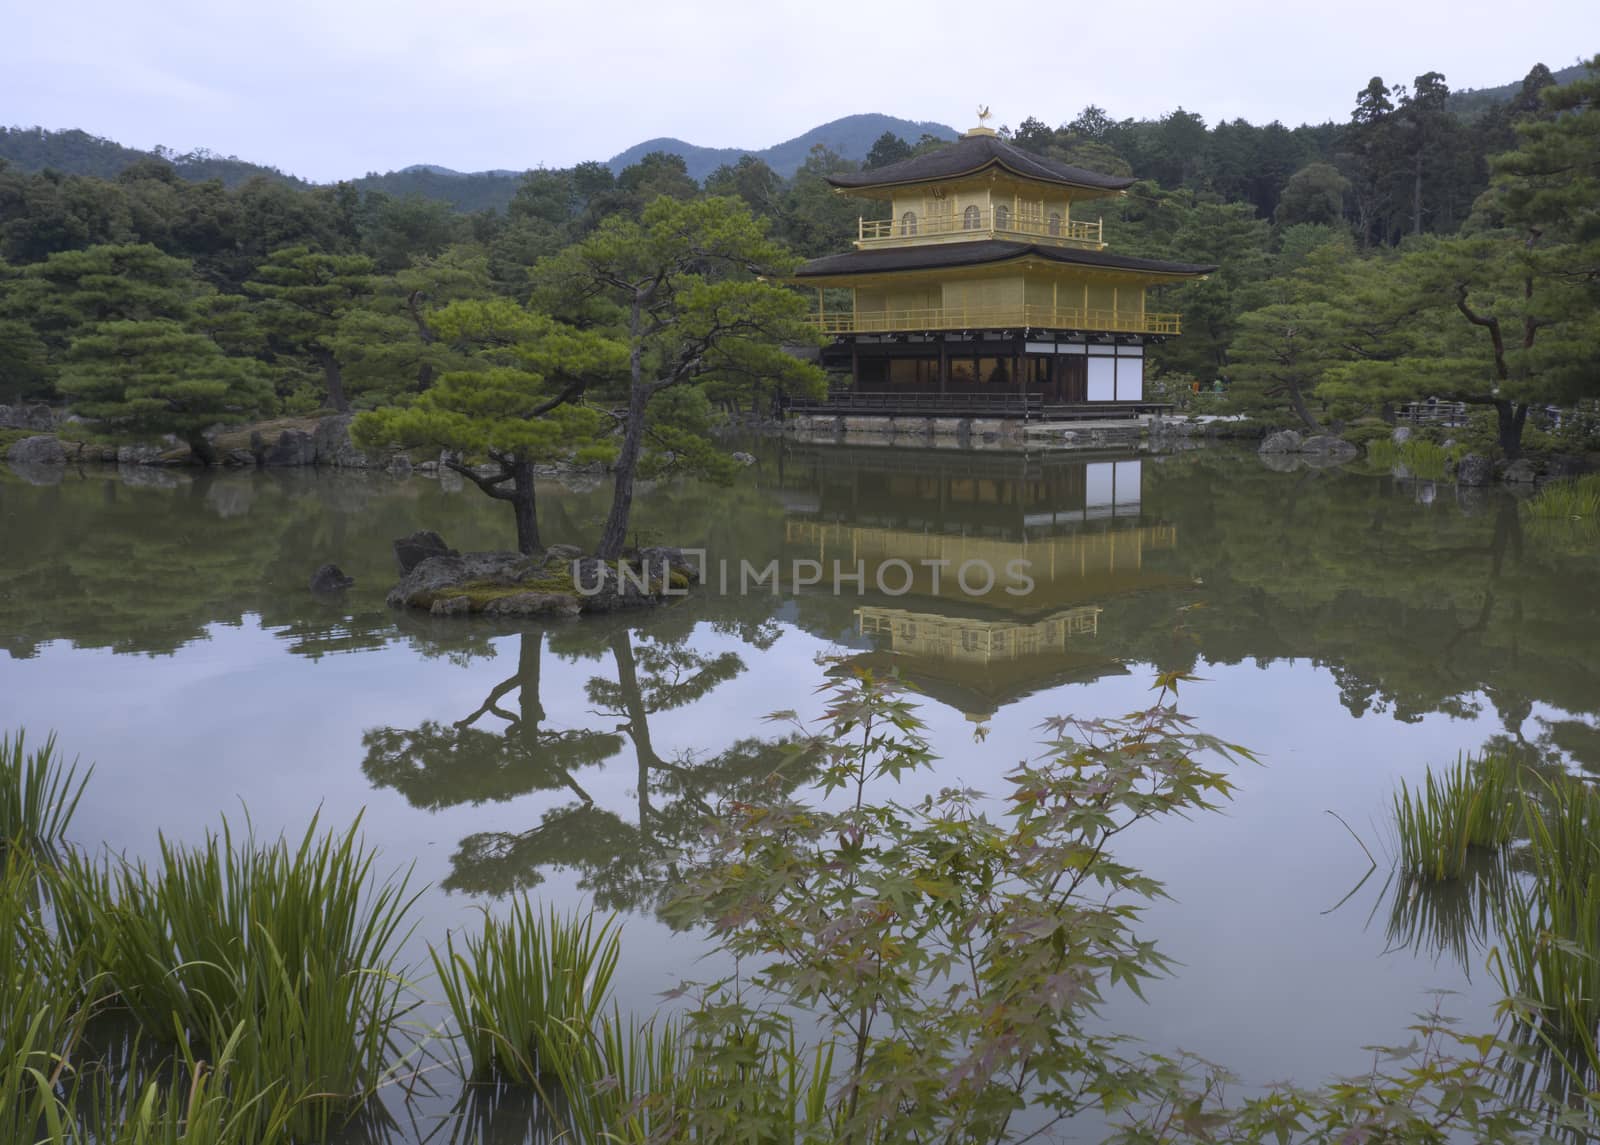 The Kinkaku-ji Temple (Golden Pavilion Temple) in Kyoto, Japan, is a World Cultural Heritage featuring a shining golden pavilion and a pond-centered garden. It is a temple of the Zen sect of Buddhism.